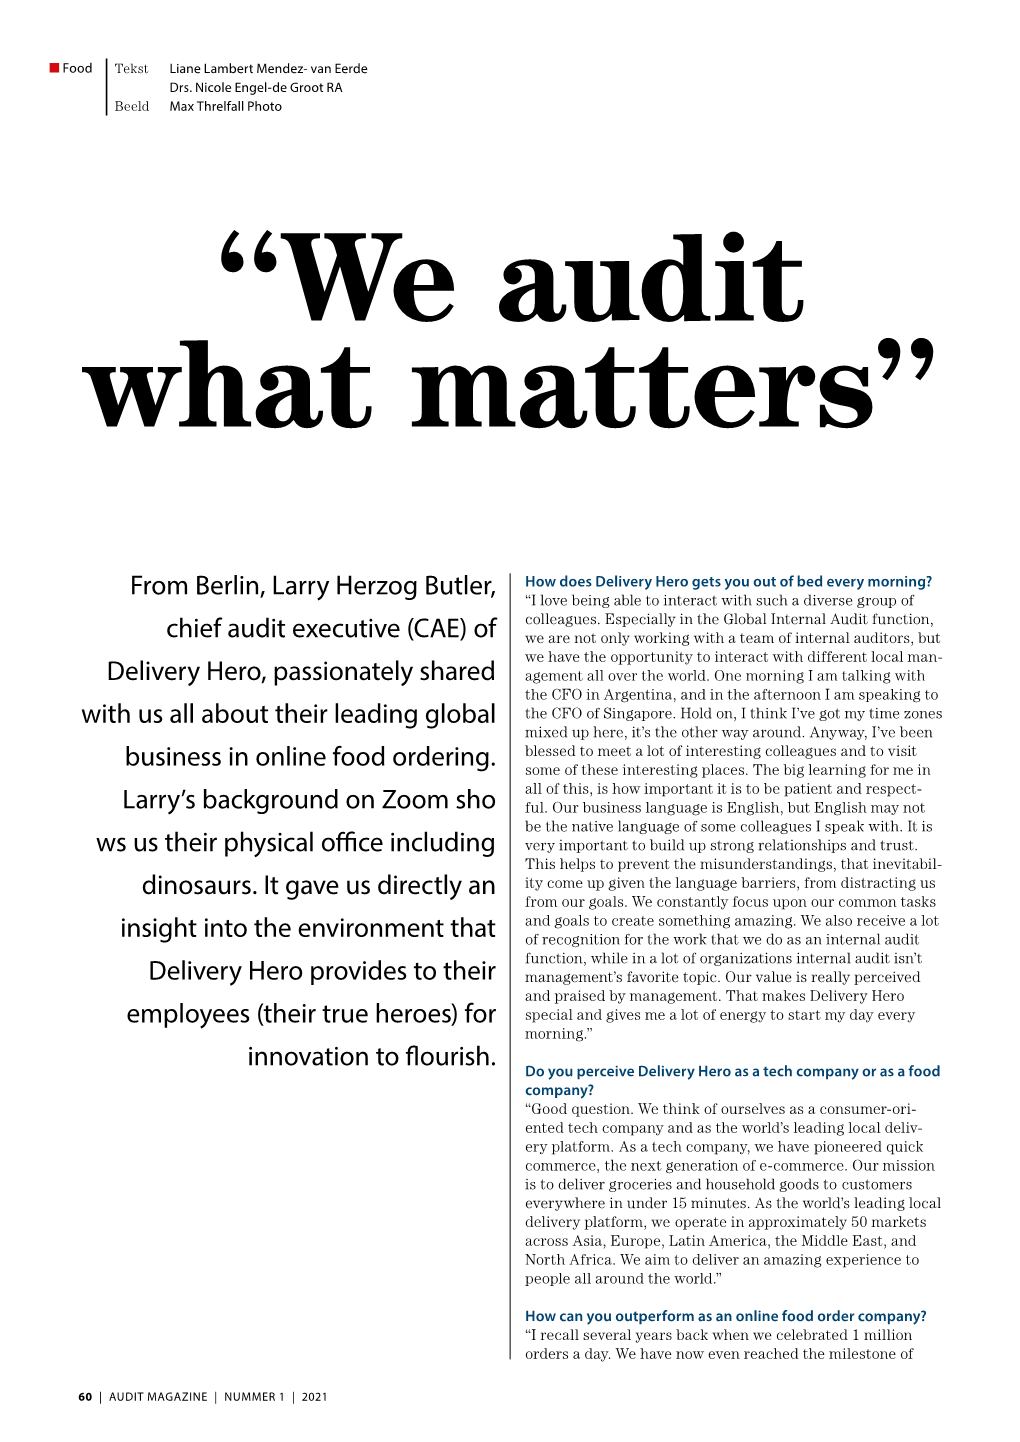 From Berlin, Larry Herzog Butler, Chief Audit Executive (CAE) of Delivery